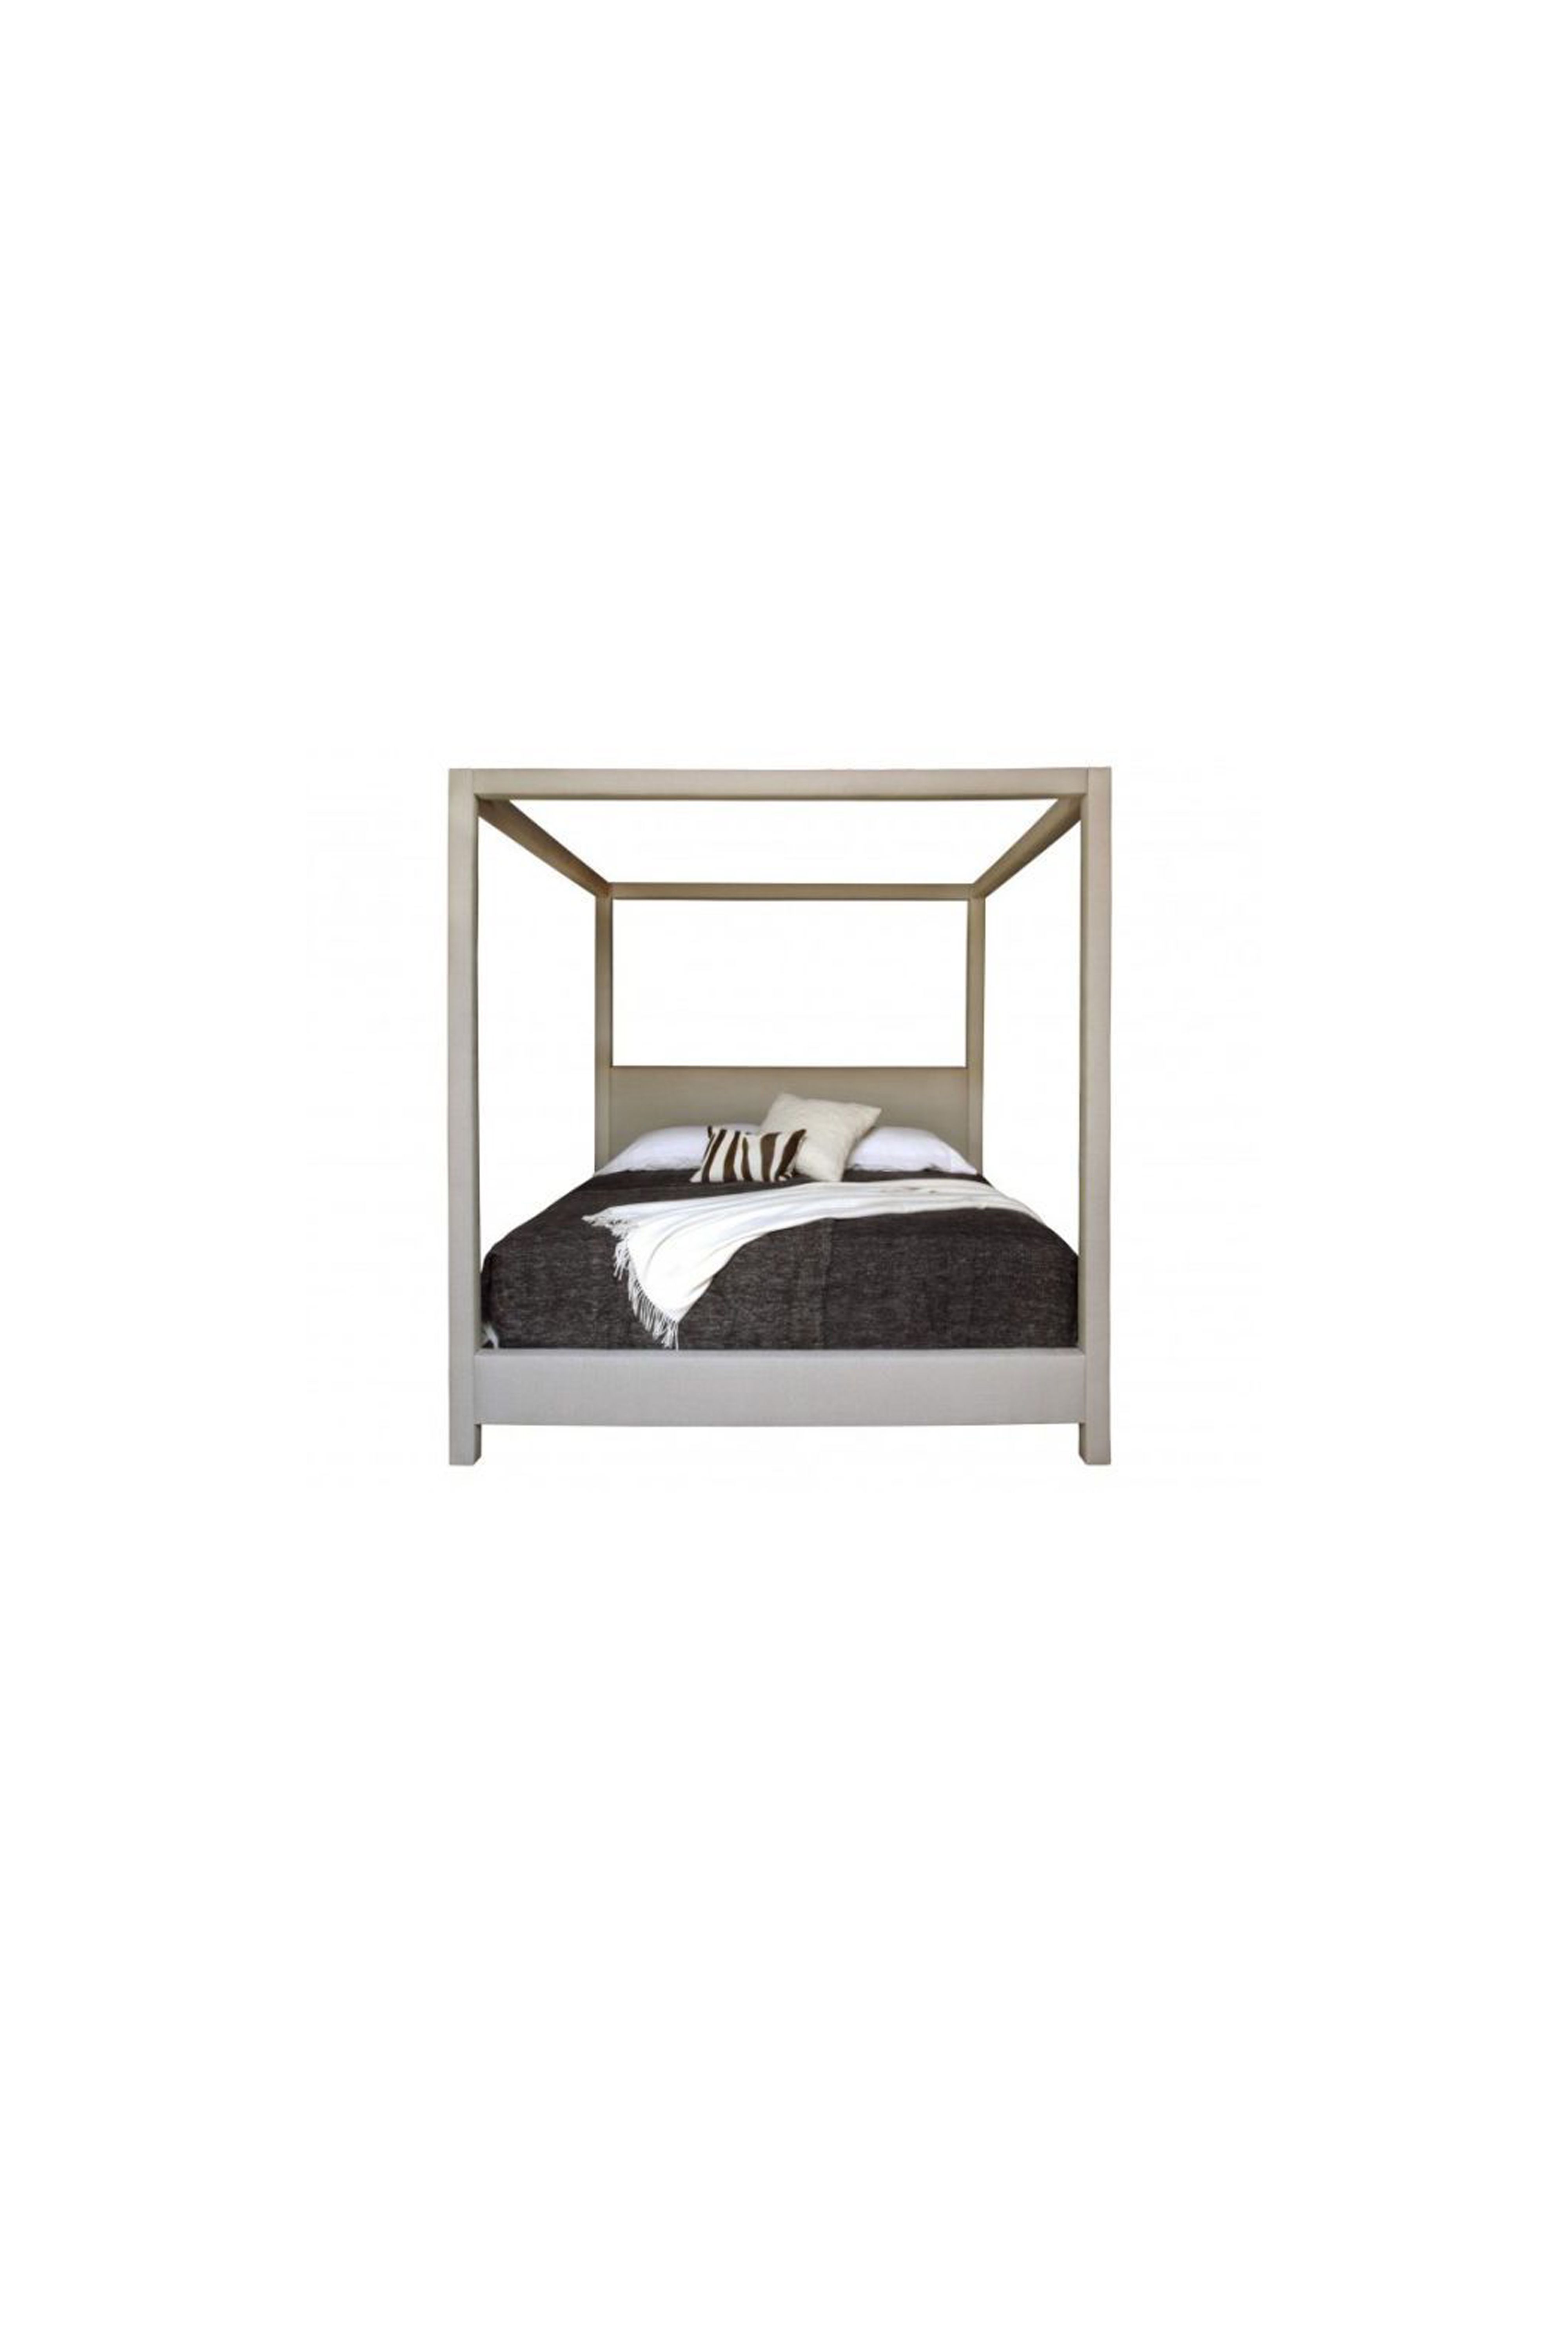 bunk beds mr price home